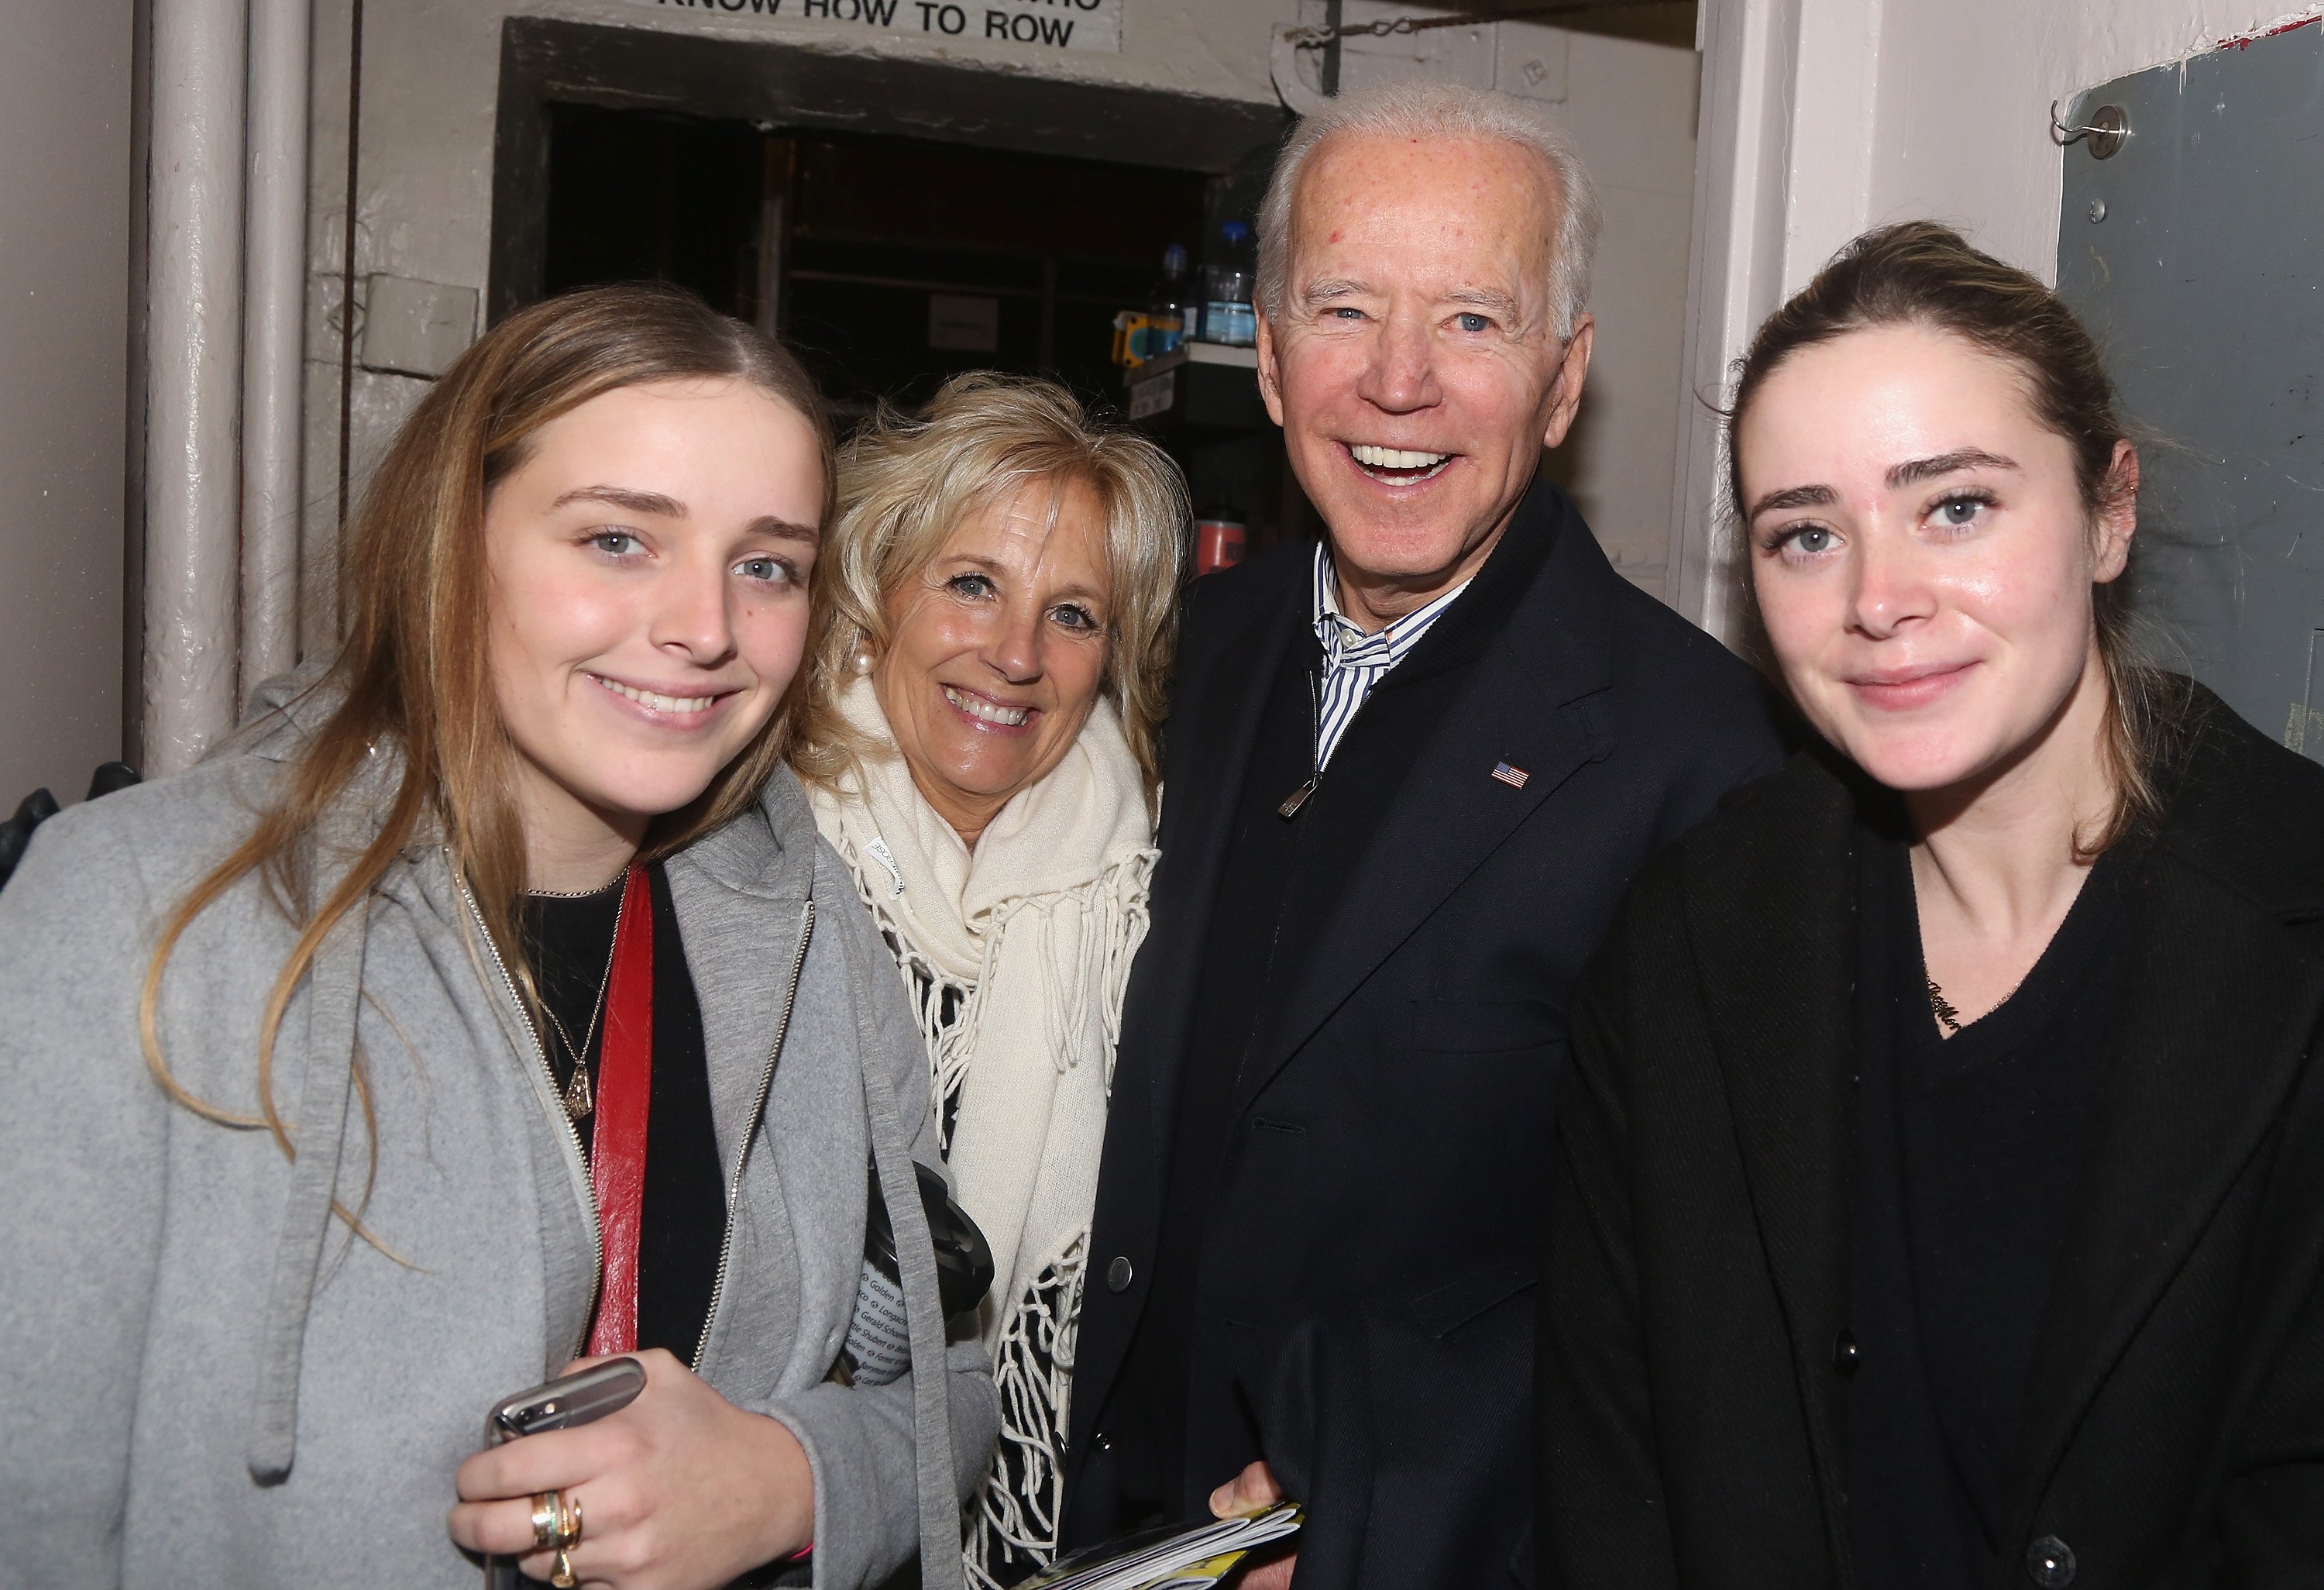 Finnegan Biden, Jill Biden, Joe Biden and Naomi Biden pose backstage at the hit play based on the classic Harper Lee novel "To Kill a Mockingbird" on Broadway at The Shubert Theatre on December 19, 2018 in New York City | Source: Getty Images 